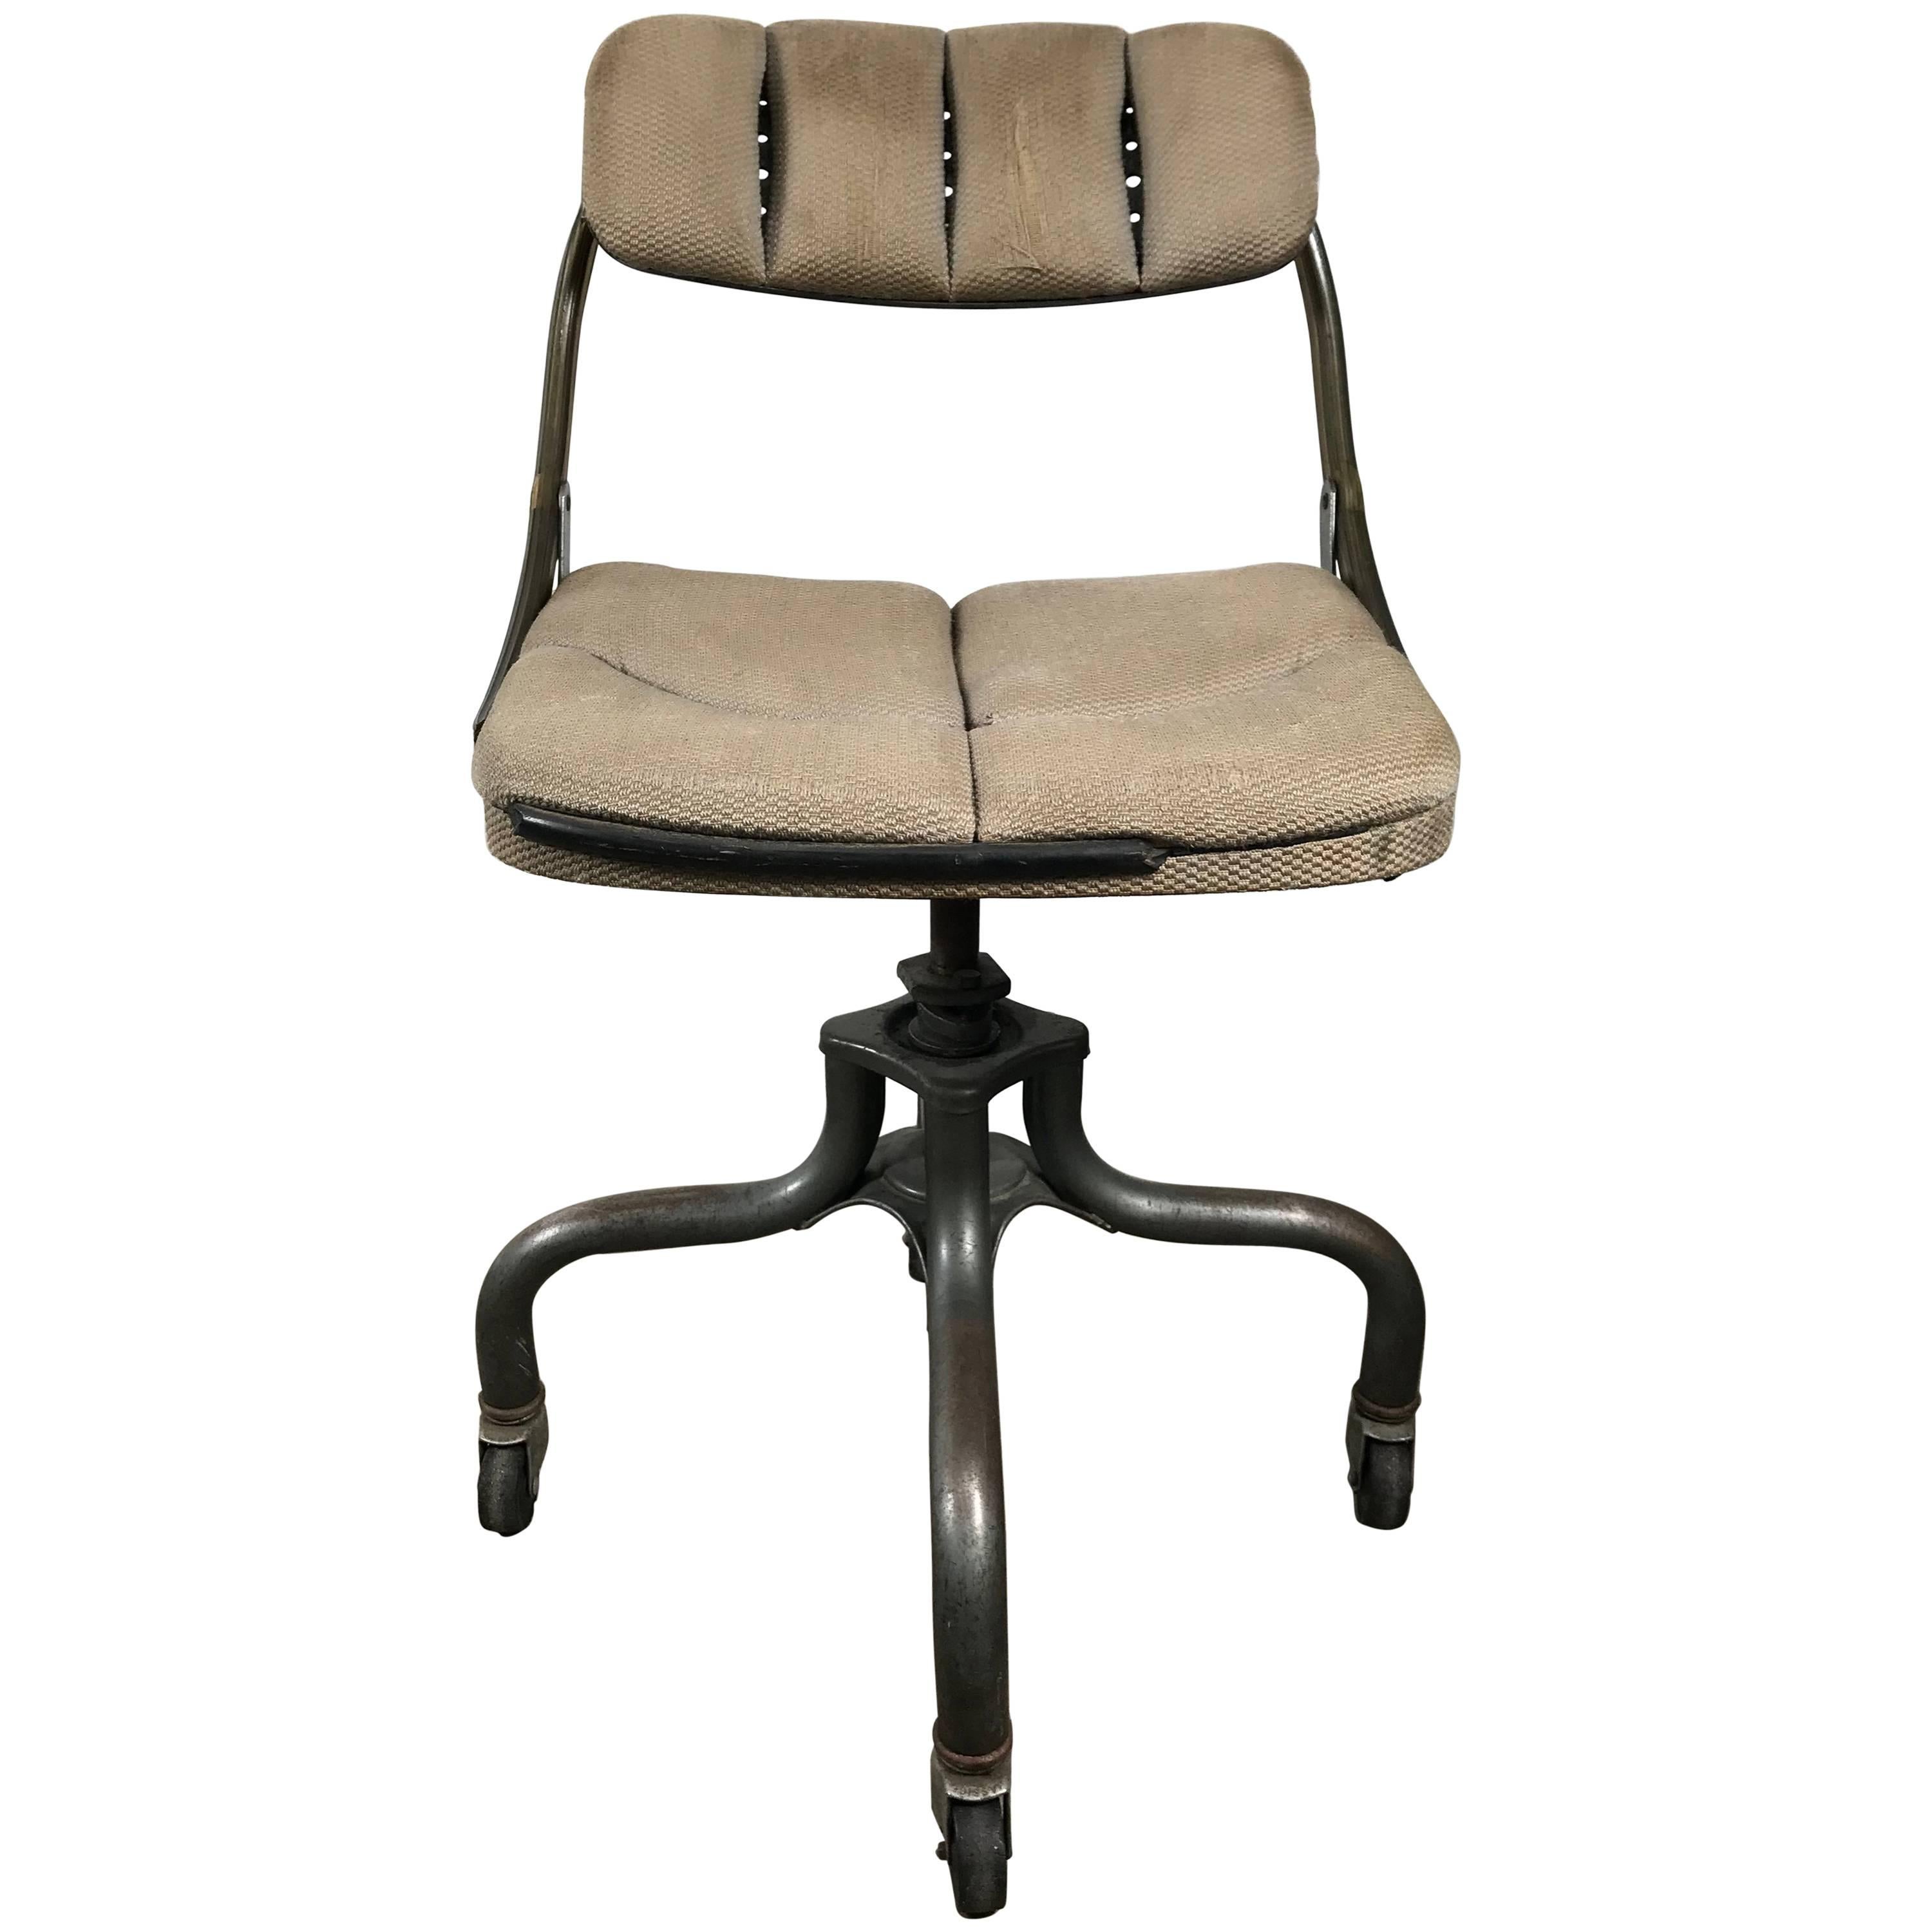 Early Antique Industrial Adjustable Rolling Desk Chair by DoMore